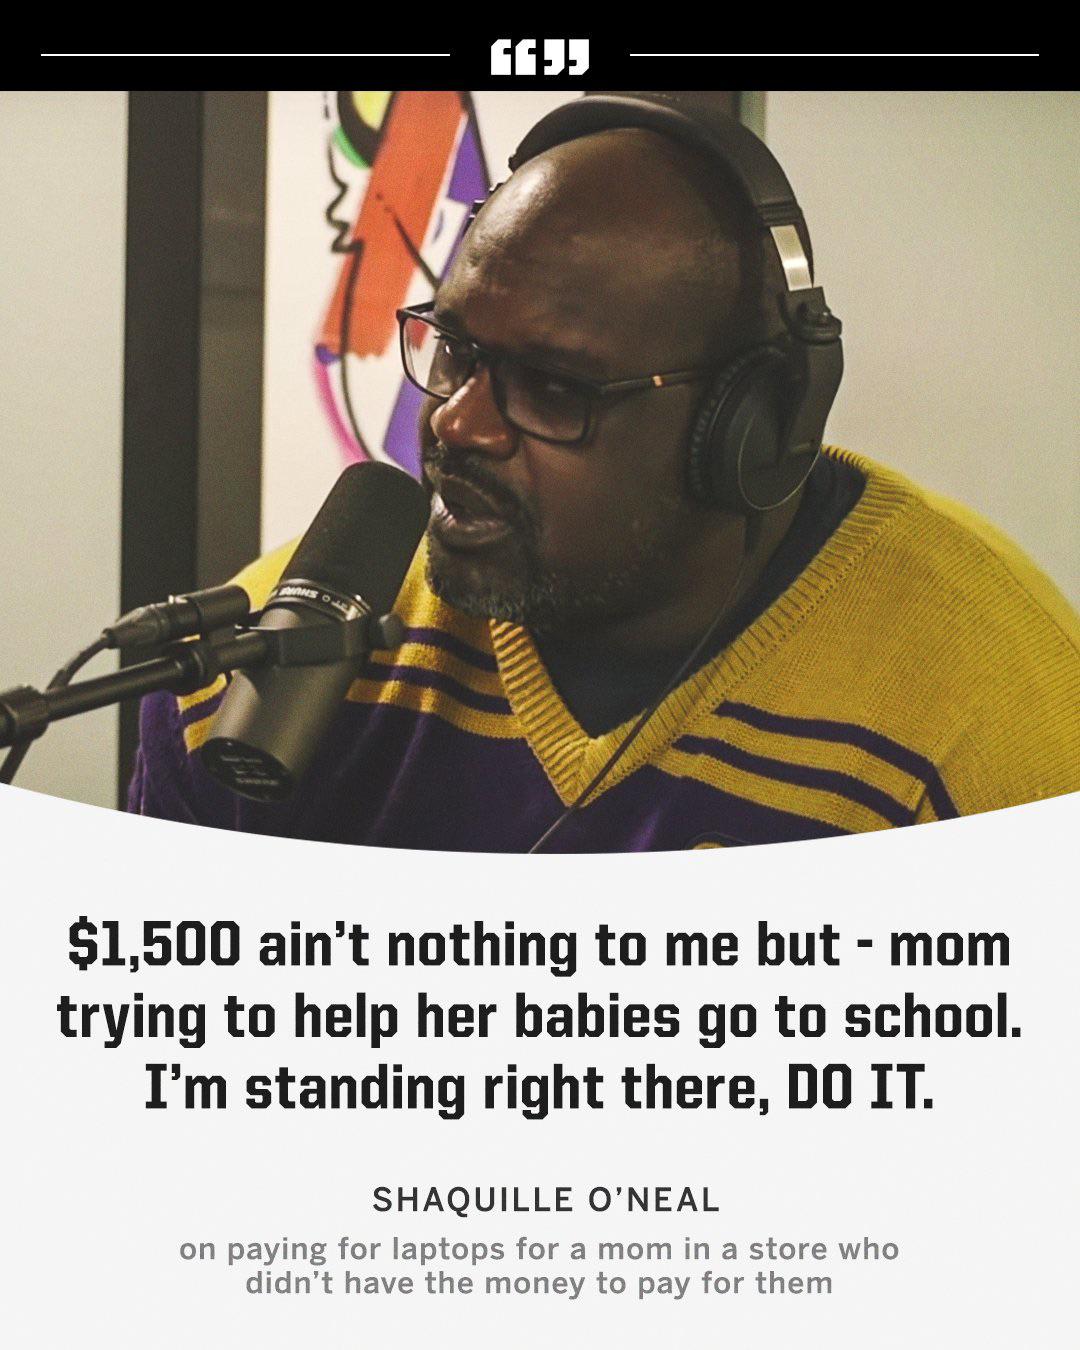 Shaq says he goes into stores looking for moms to help out. In this moment, he said he saw a mom at the register who couldn’t afford school laptops for her kids. Shaq stepped up and said, “I got you.”